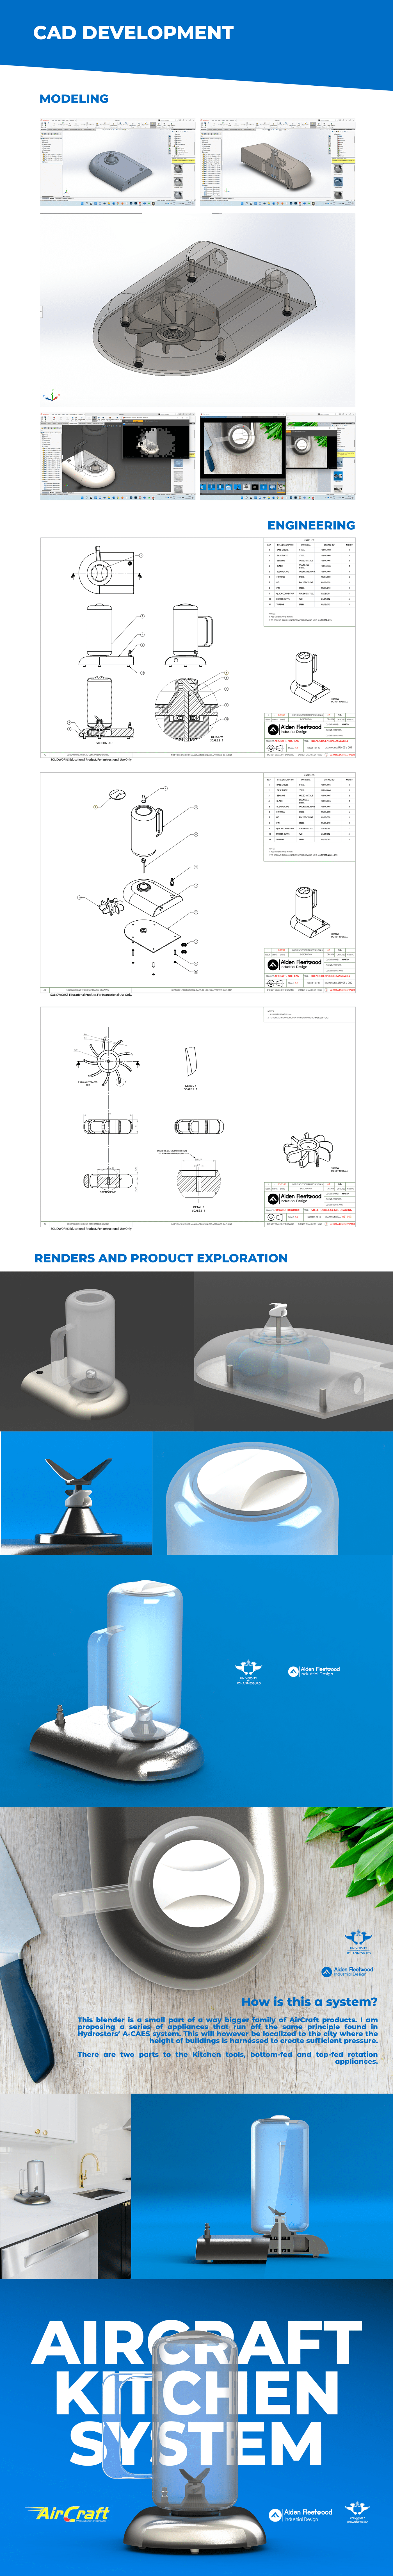 Aircraft concept design exams FinalExamProject industrial kitchendesign product tools